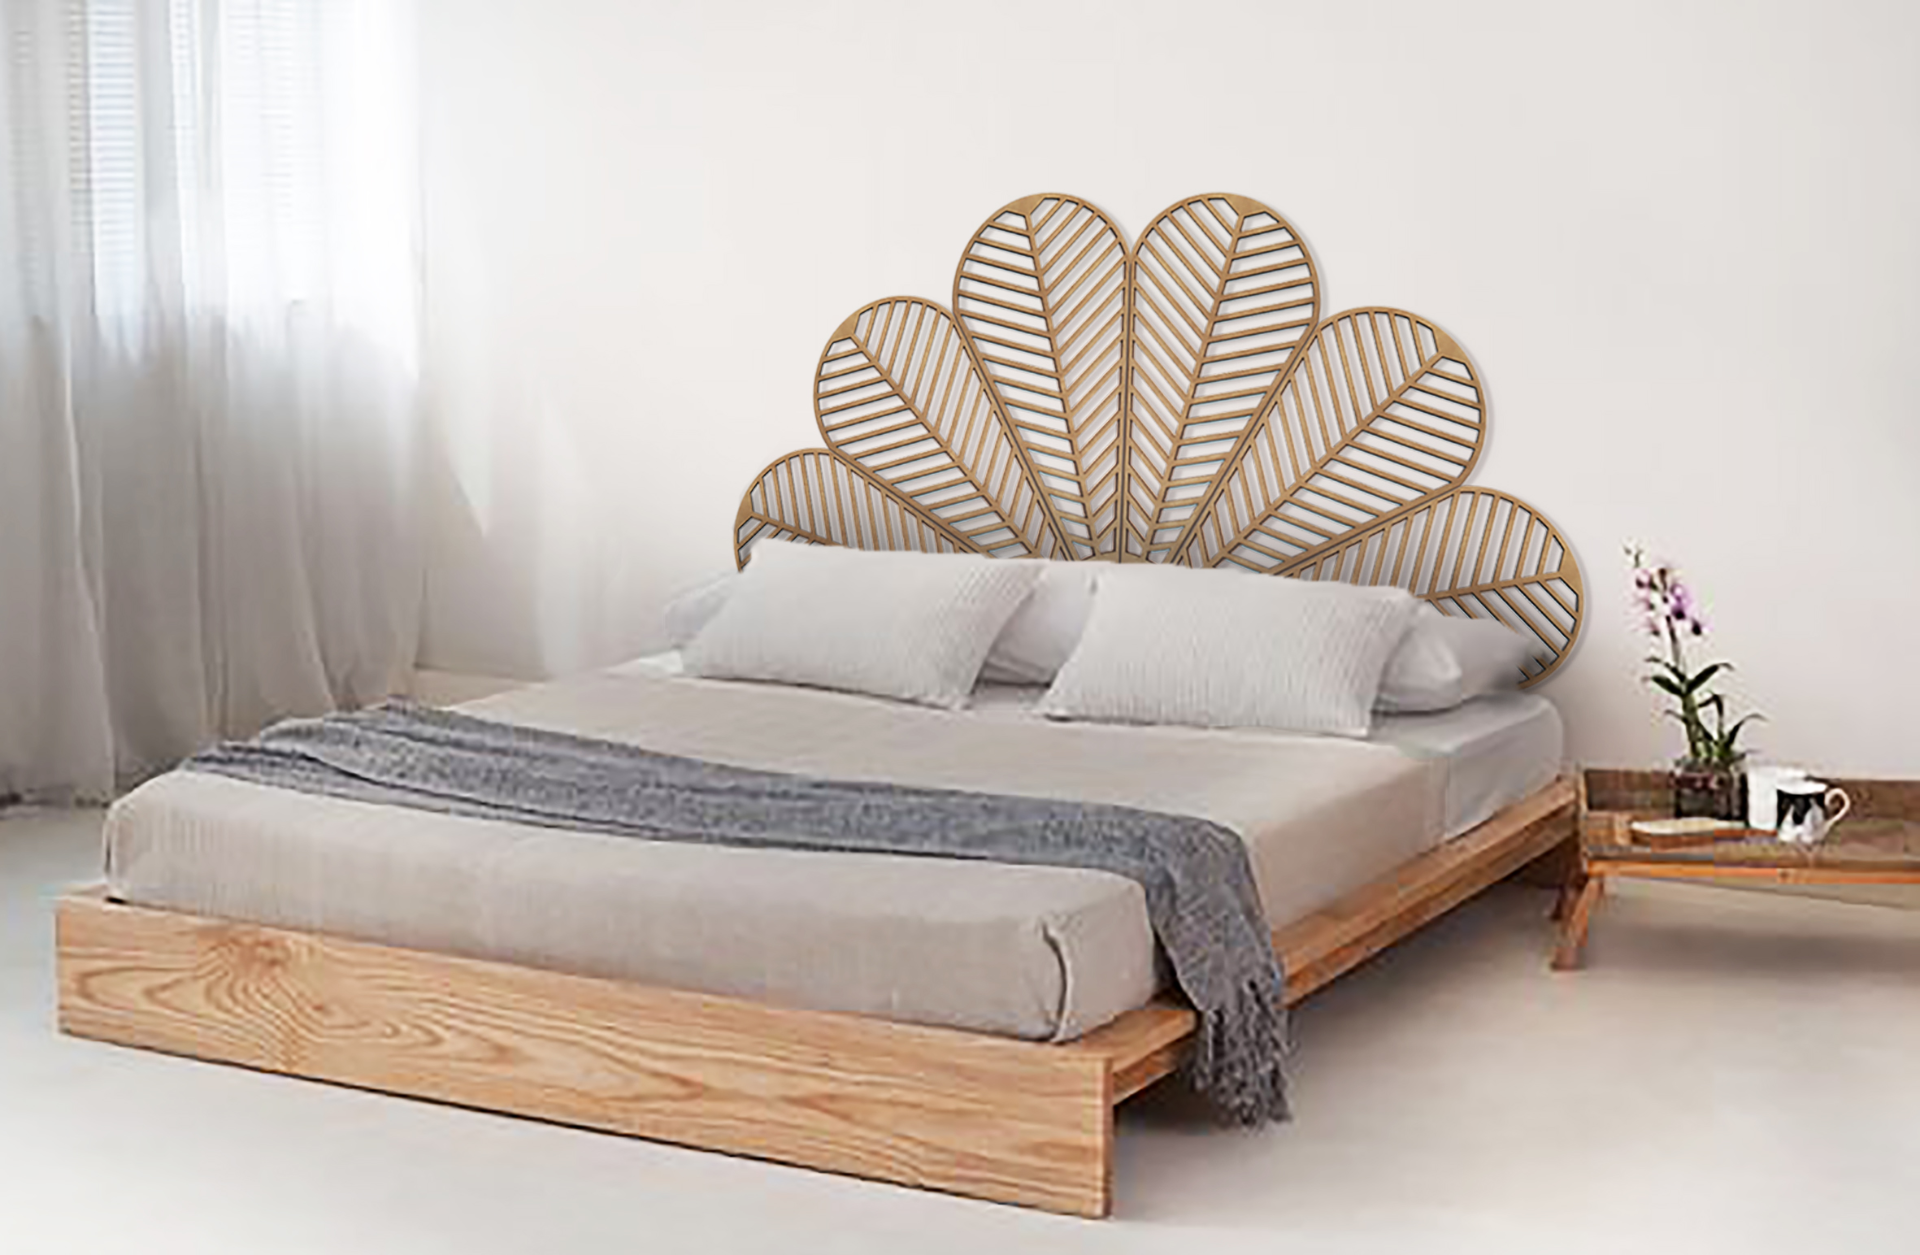 Wooden Headboard - All sizes - Natural Wood - Wall Bed Board